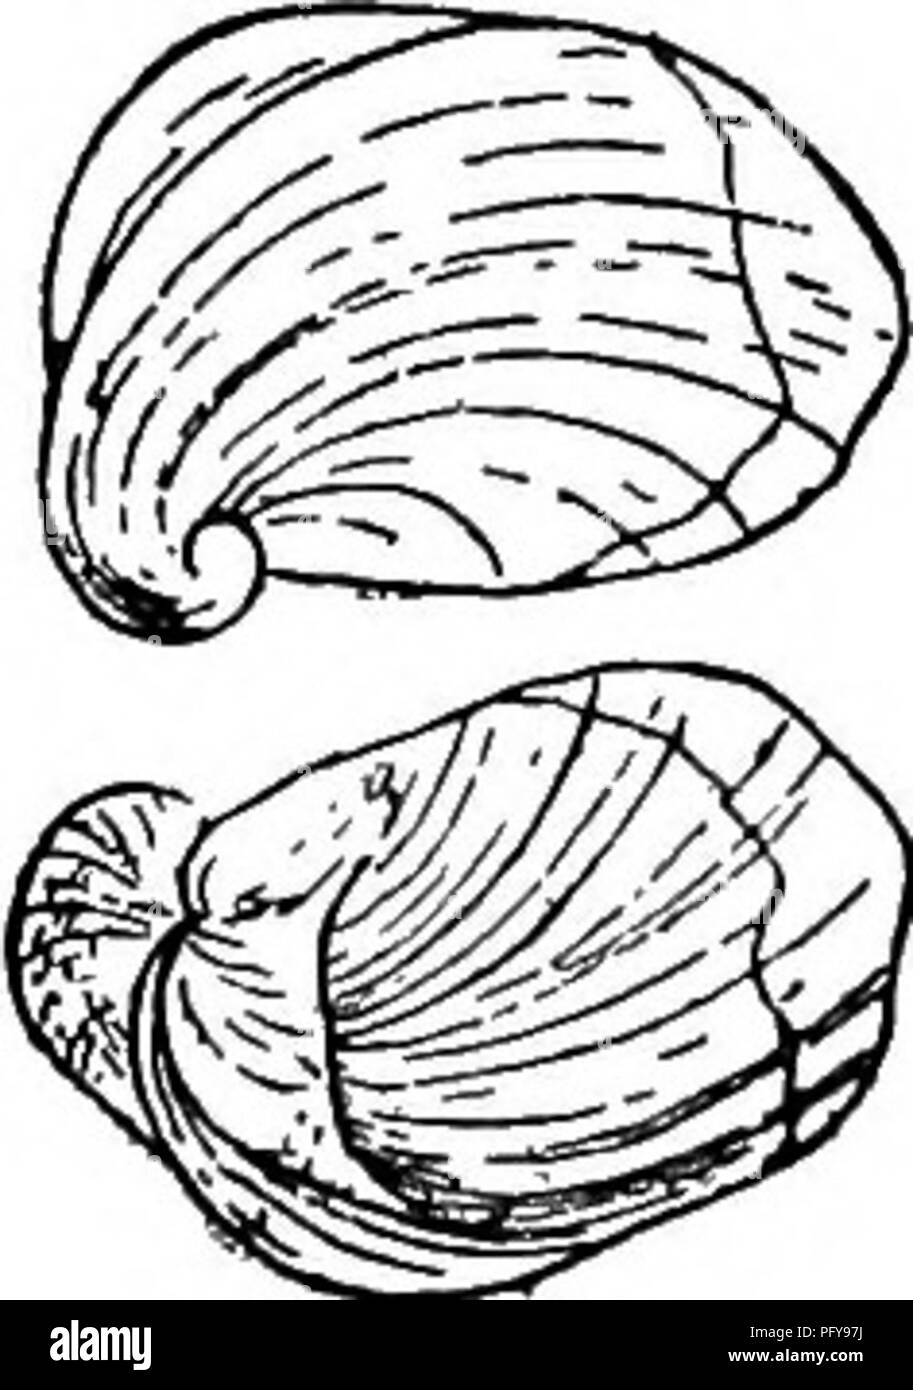 . Fresh-water biology. Freshwater biology. 986 FRESH-WATER BIOLOGY 59 (60) Shell large, thick and solid; apex smooth Lanx Clessin. This genus is restricted to the Pacific coast and is distinguished by the large size and thick soUd shells. Type, L. newberryi Lea.. (Fig. 1443). Fig. 1443. 60 (61) Shell ancyliform, small, thin, with a septum across the apical portion of the interior Gundlachia Pfeifier. This very remarkable and pecuUar genus has a general but very local distribution from the Atlantic to the Pacific. Example, G. meekiana Stimp., (Fig. 1444; X 6), from the Eastern States. Fig. 1444 Stock Photo